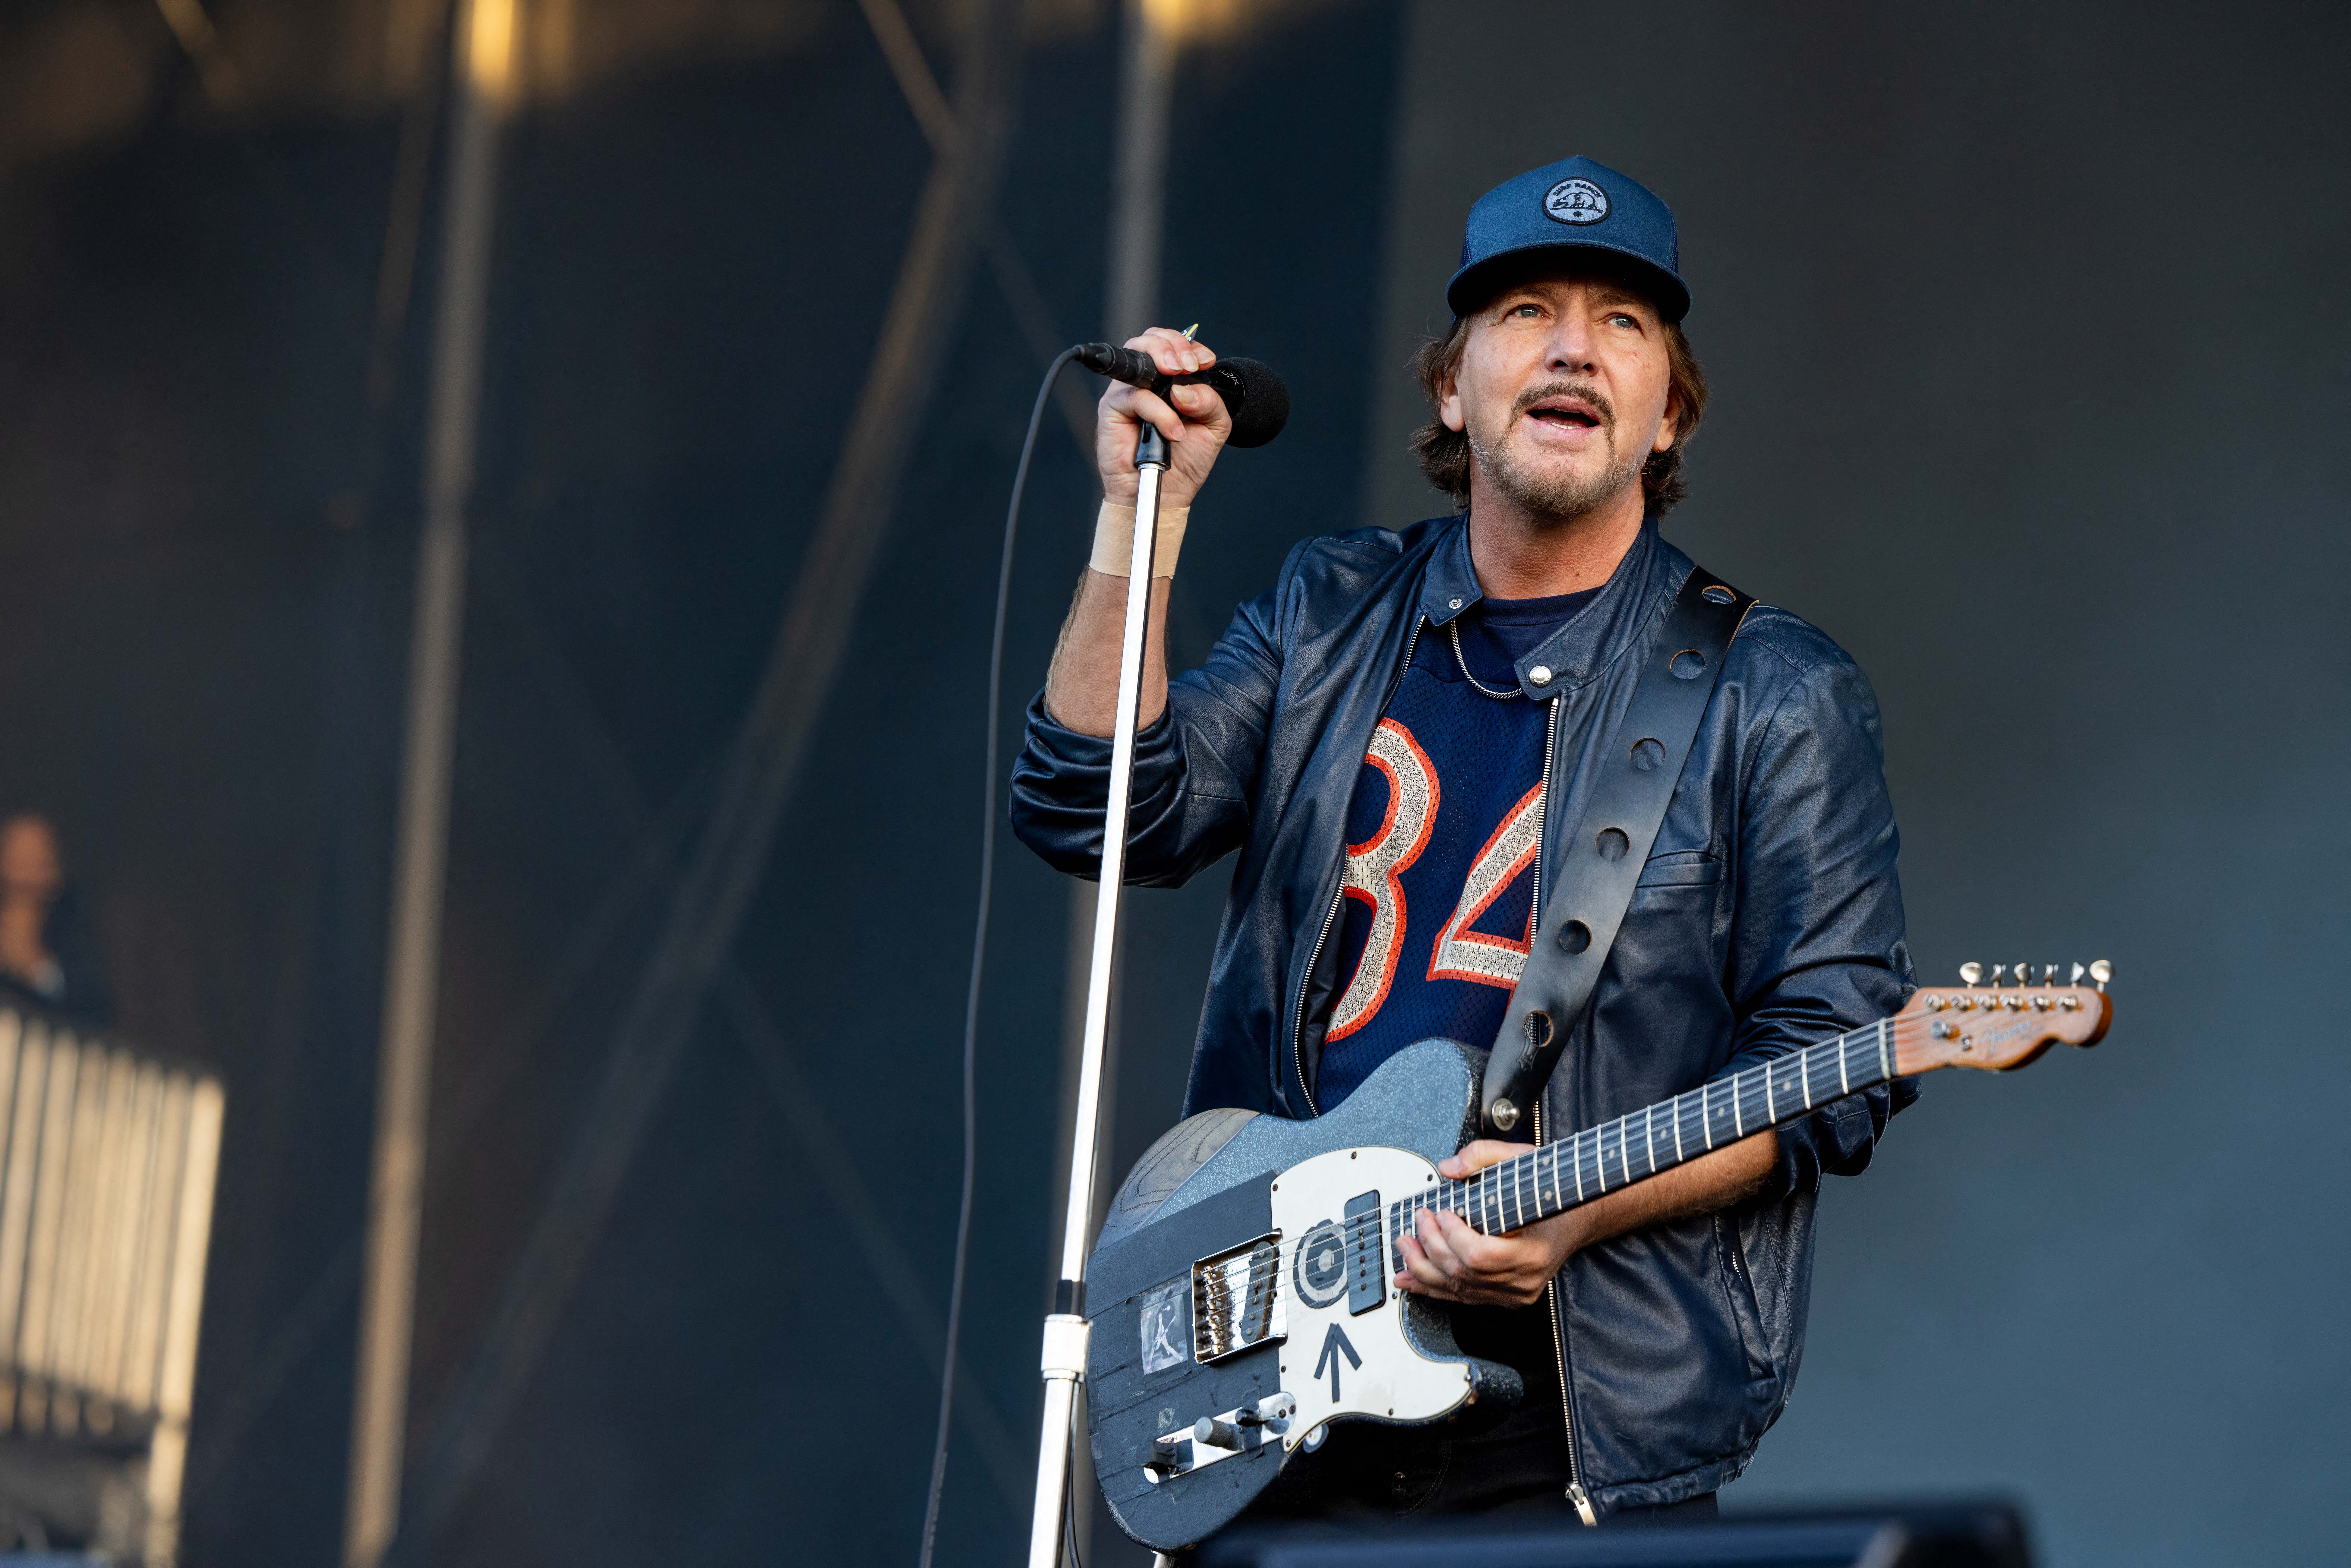 Frontman Eddie Vedder is renowned for giving his all in live shows